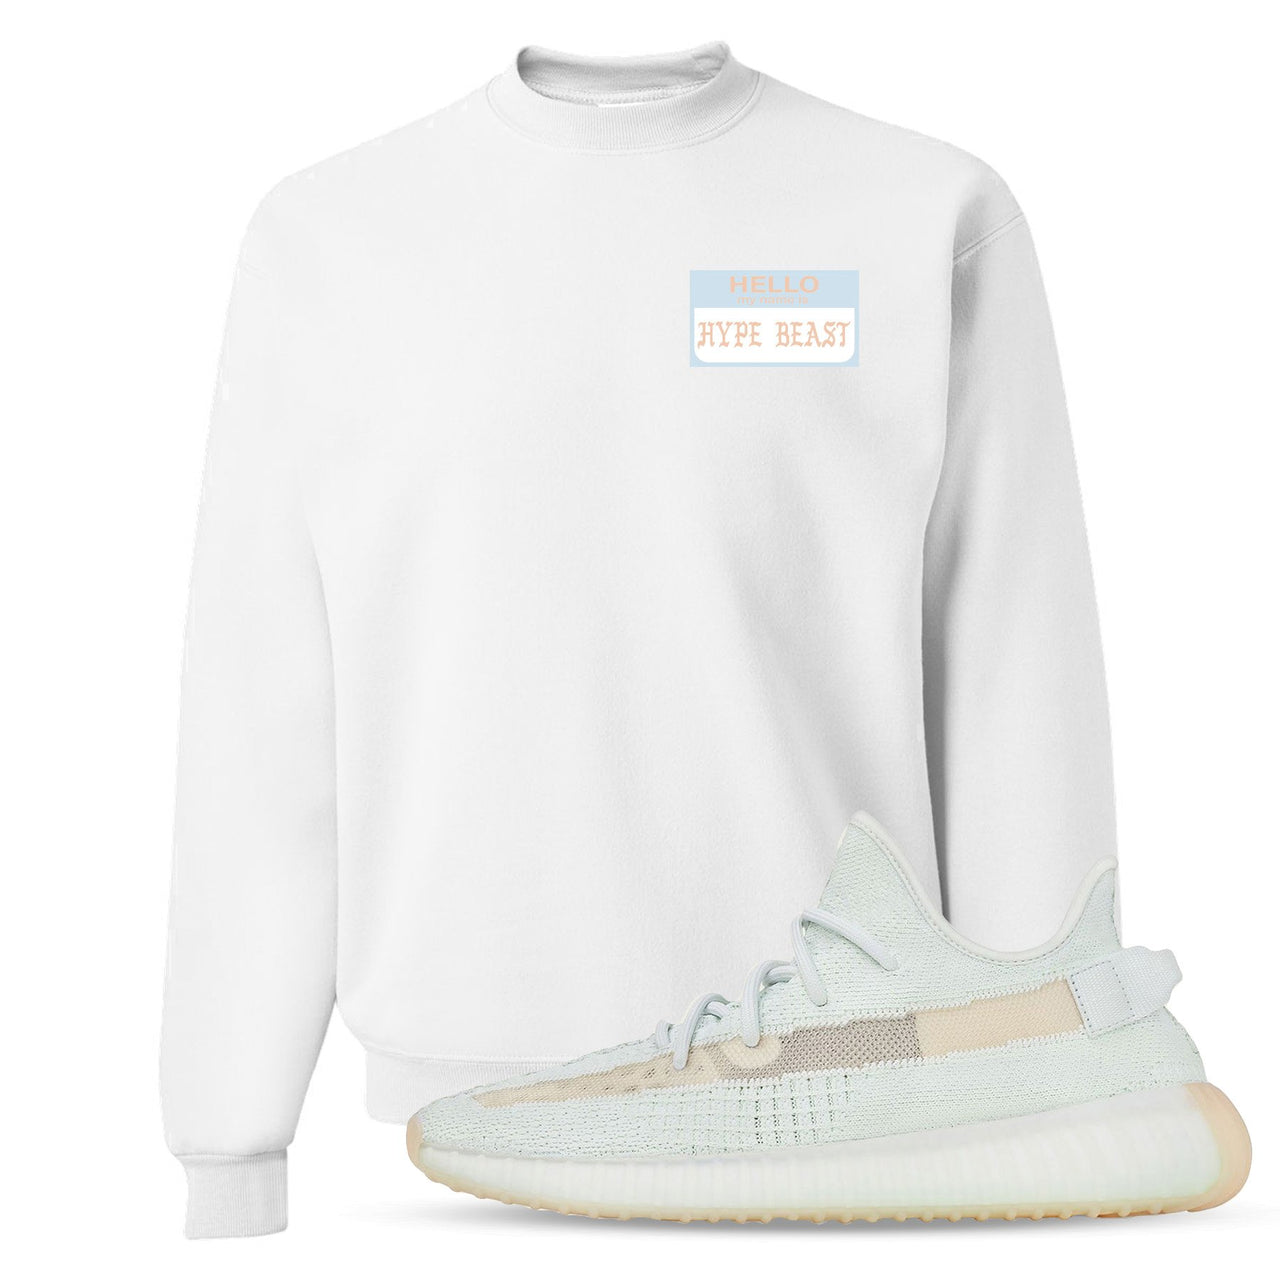 Hyperspace 350s Crewneck Sweater | Hello My Name Is Hype Beast Pablo, White